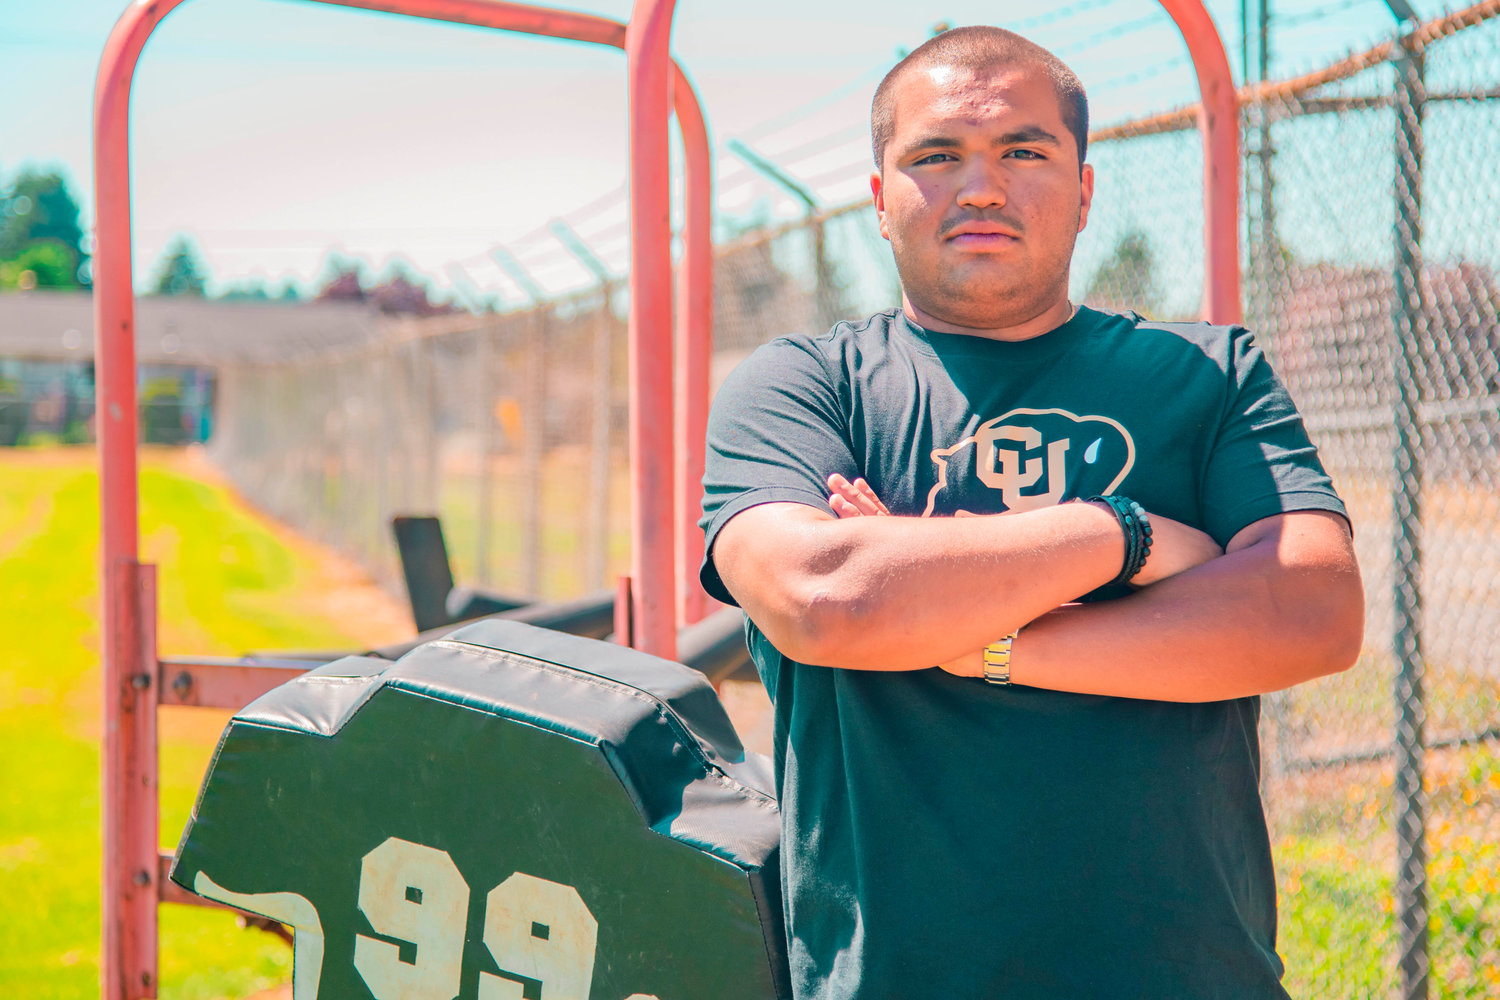 Paris Chavez poses for a photo next to football equipment in the Centralia High School practice field Monday afternoon behind Tiger Stadium.